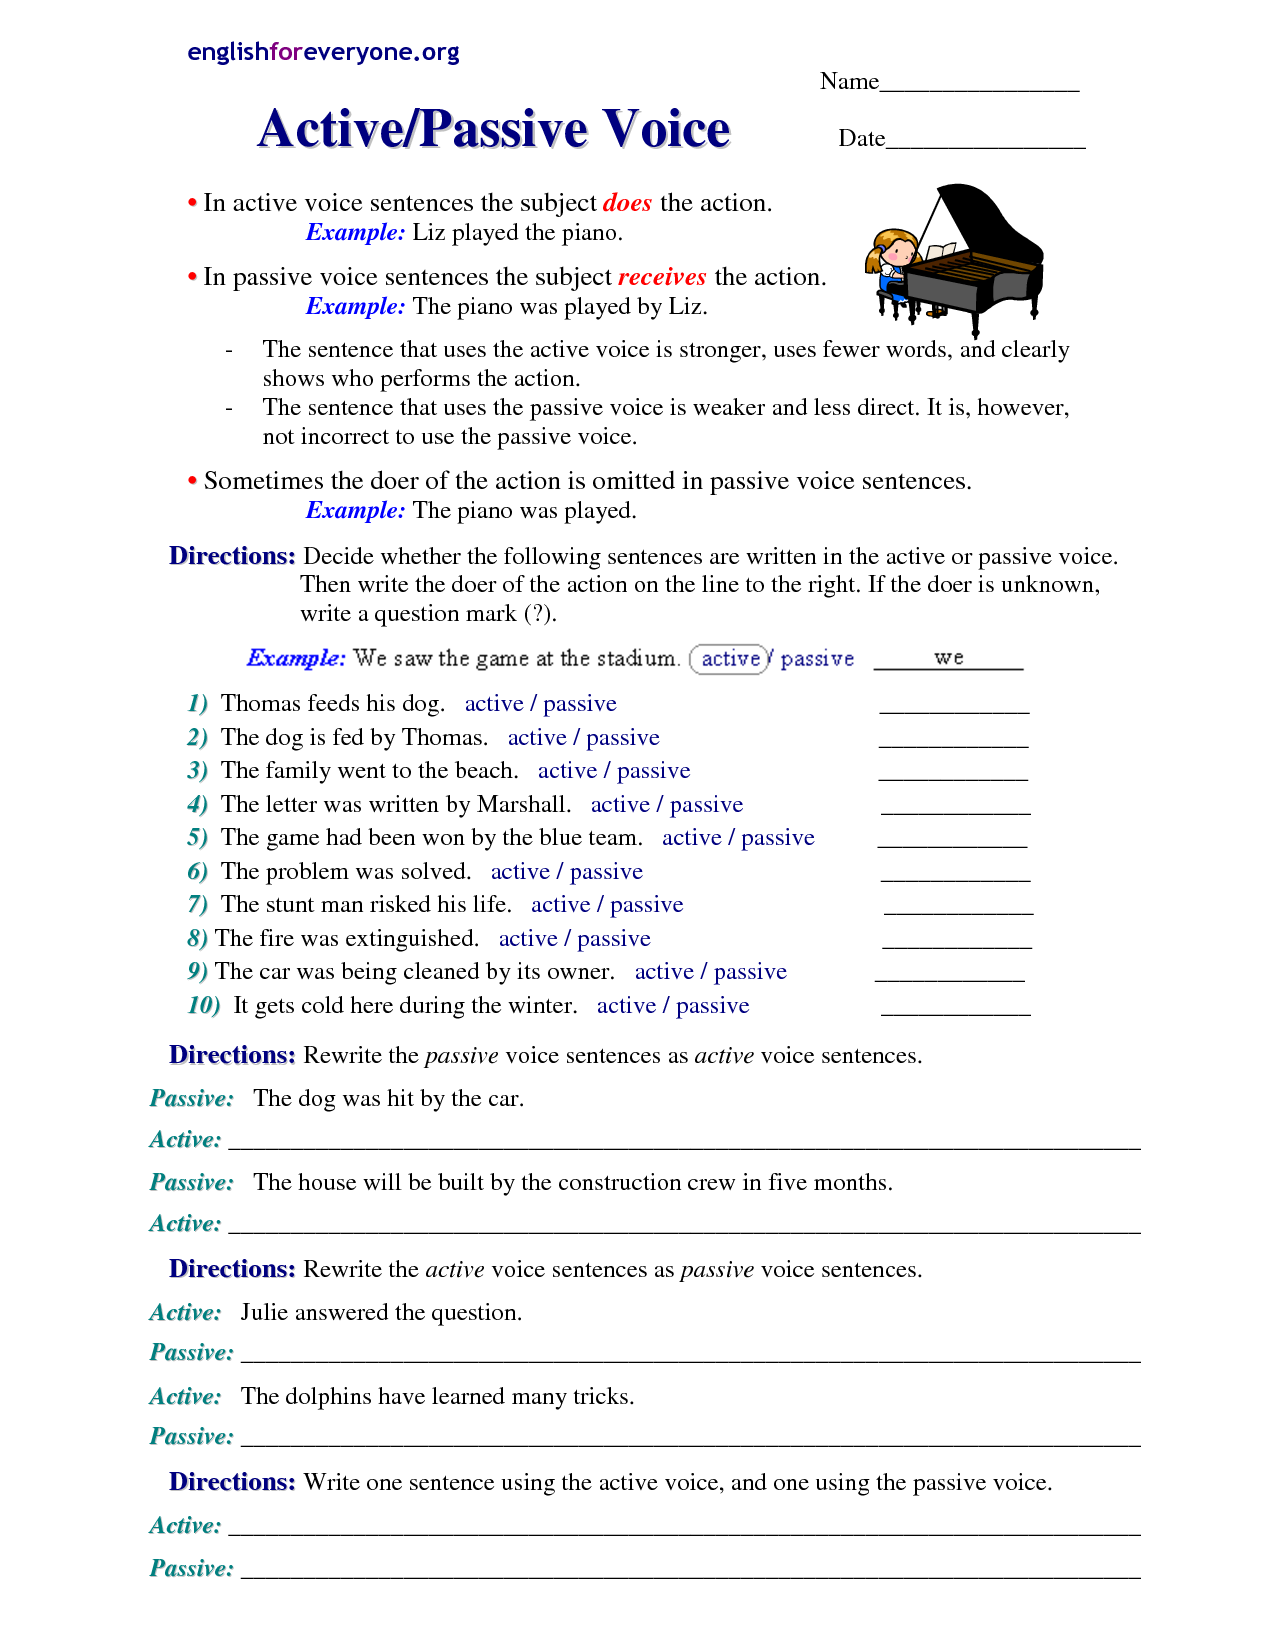 Passive Voice Exercises Pdf With Answers